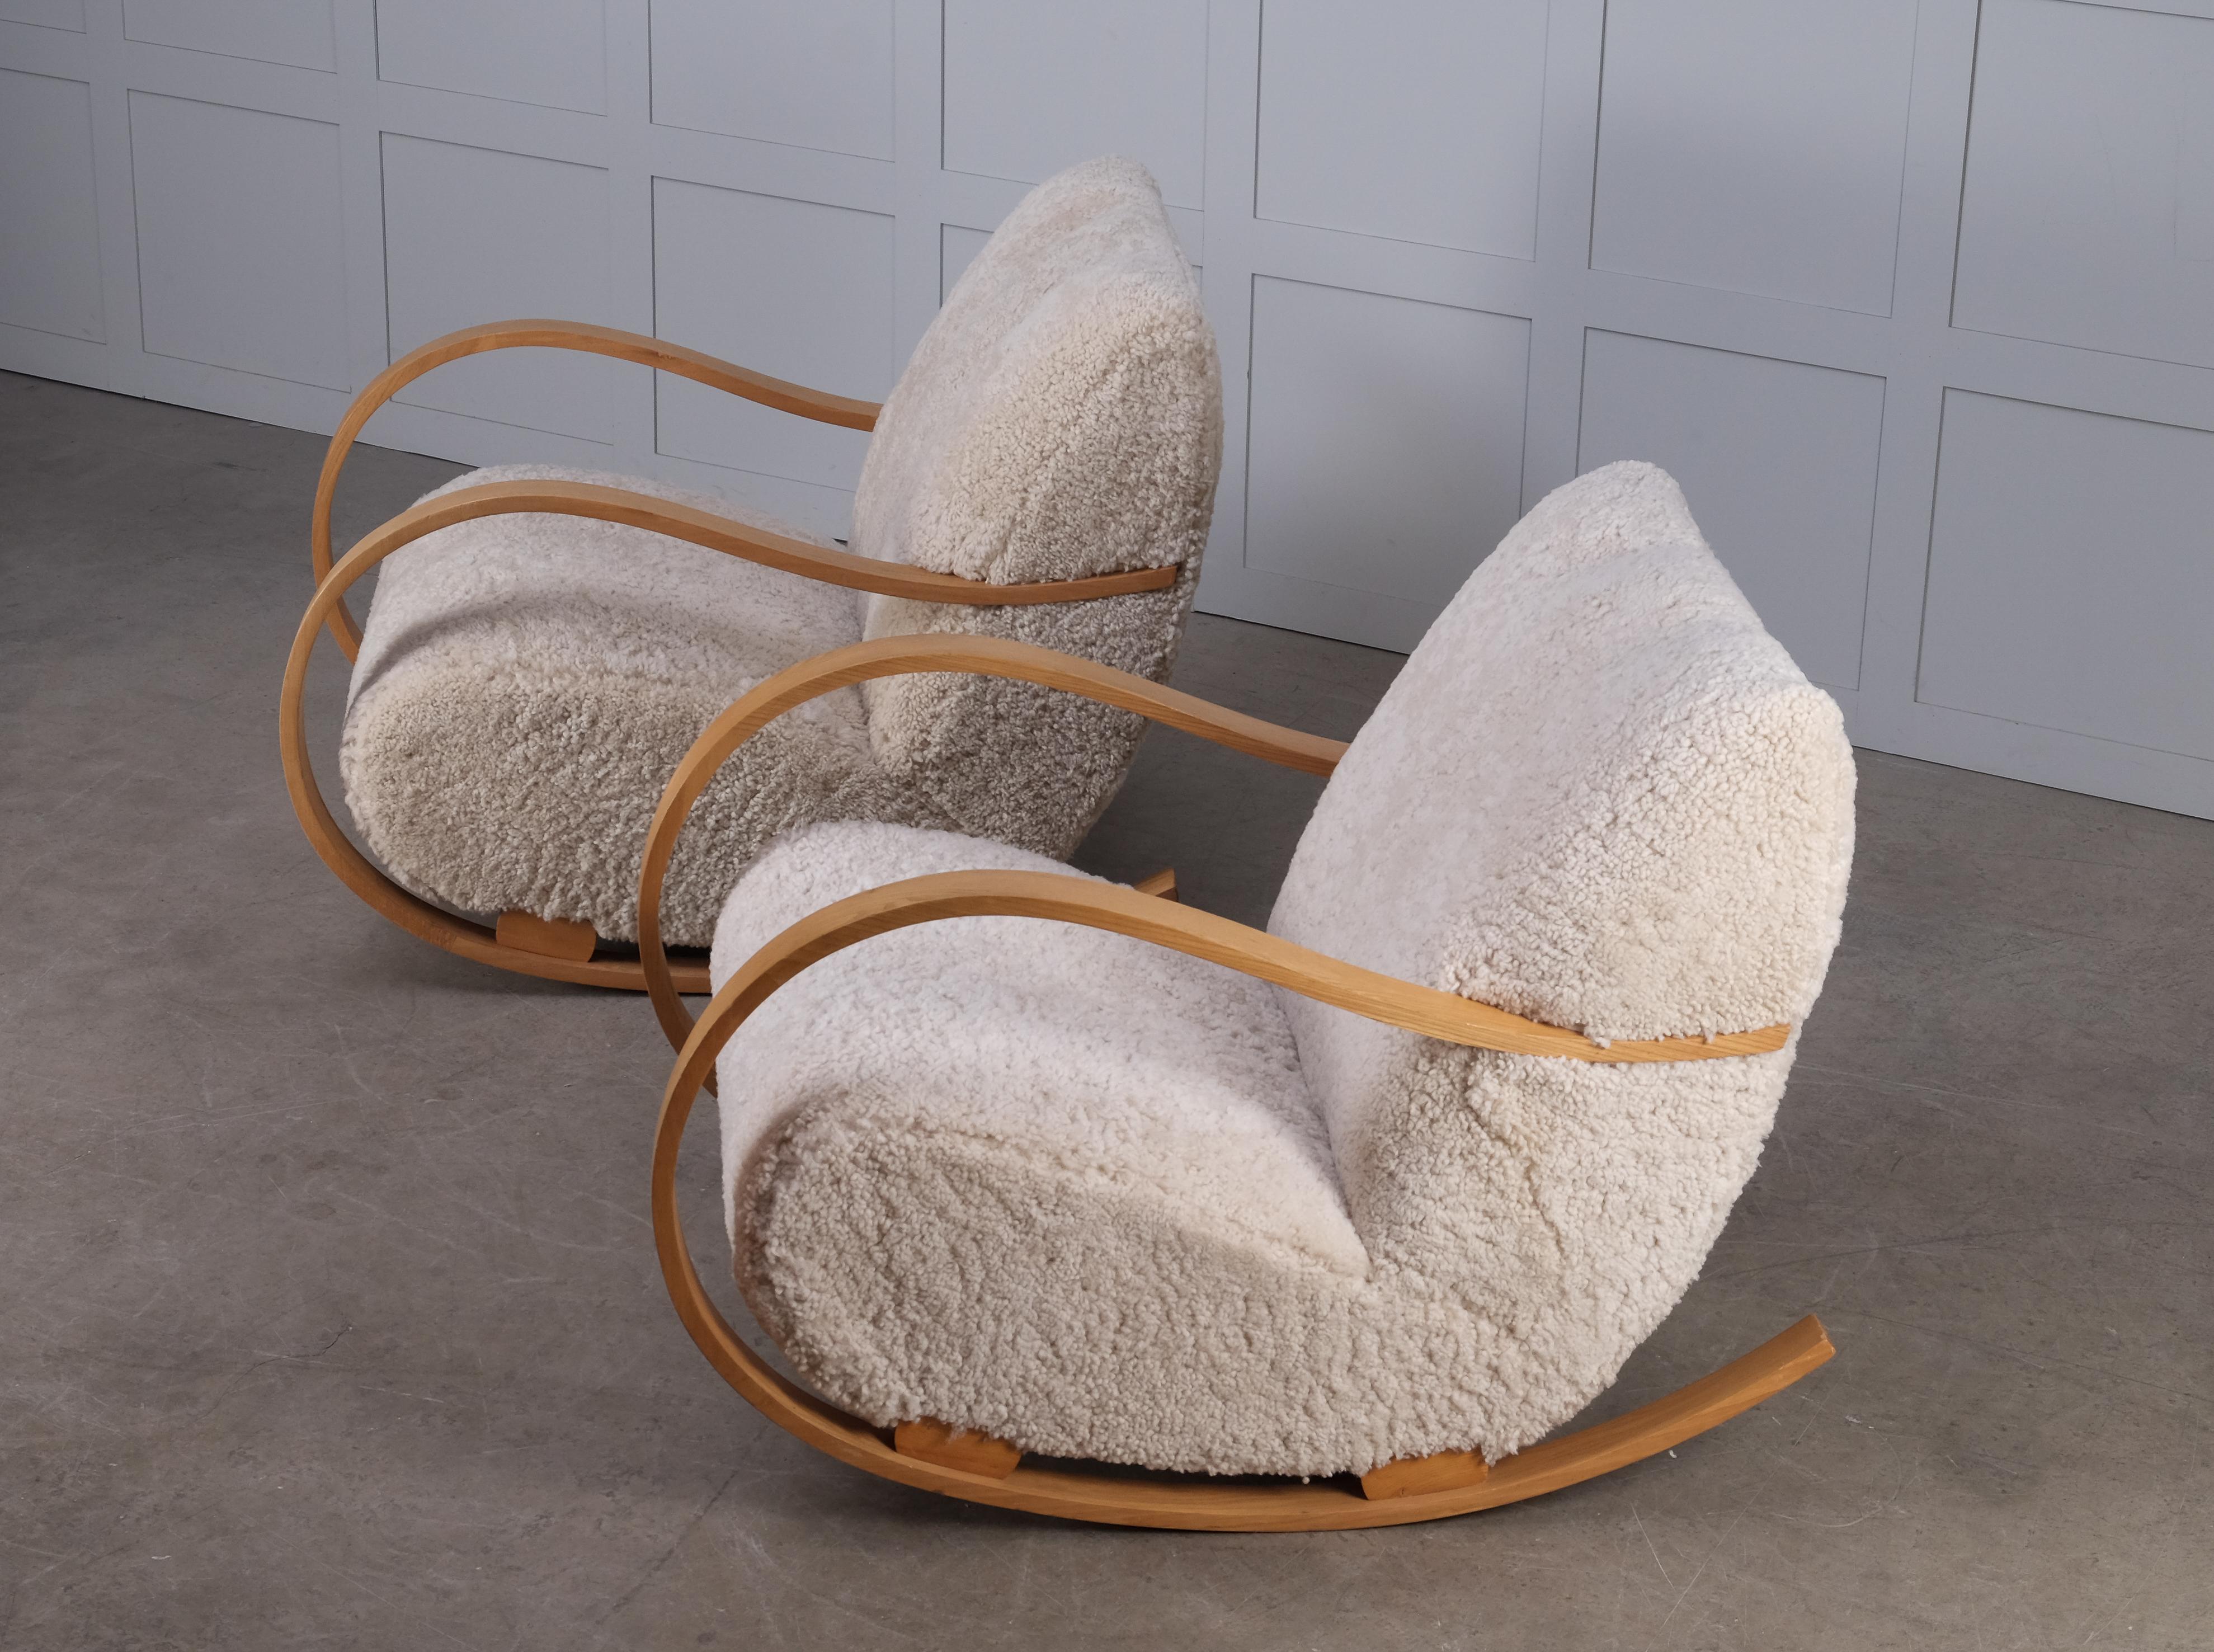 Pair of Swedish Rocking Chairs in Sheepskin, 1950s For Sale 2